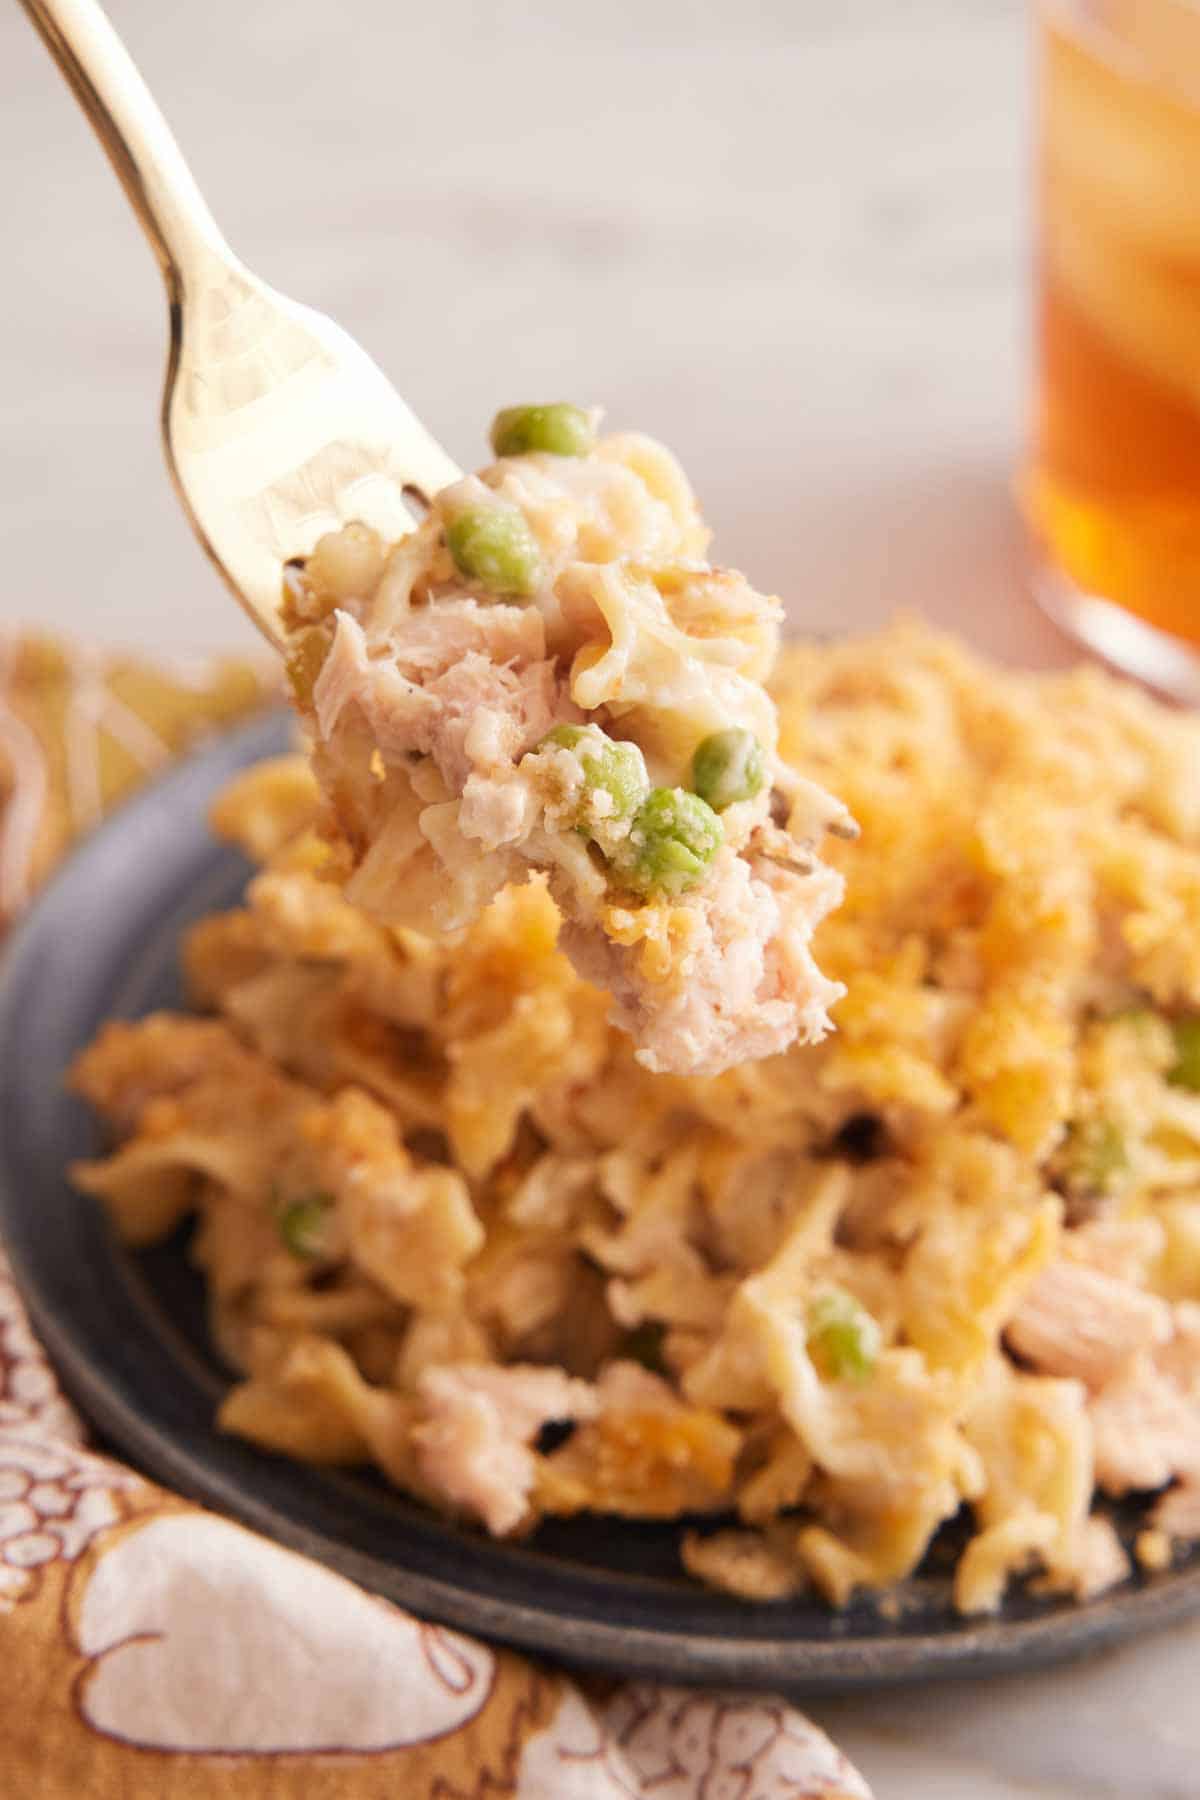 A forkful of tuna casserole lifted from a plate.